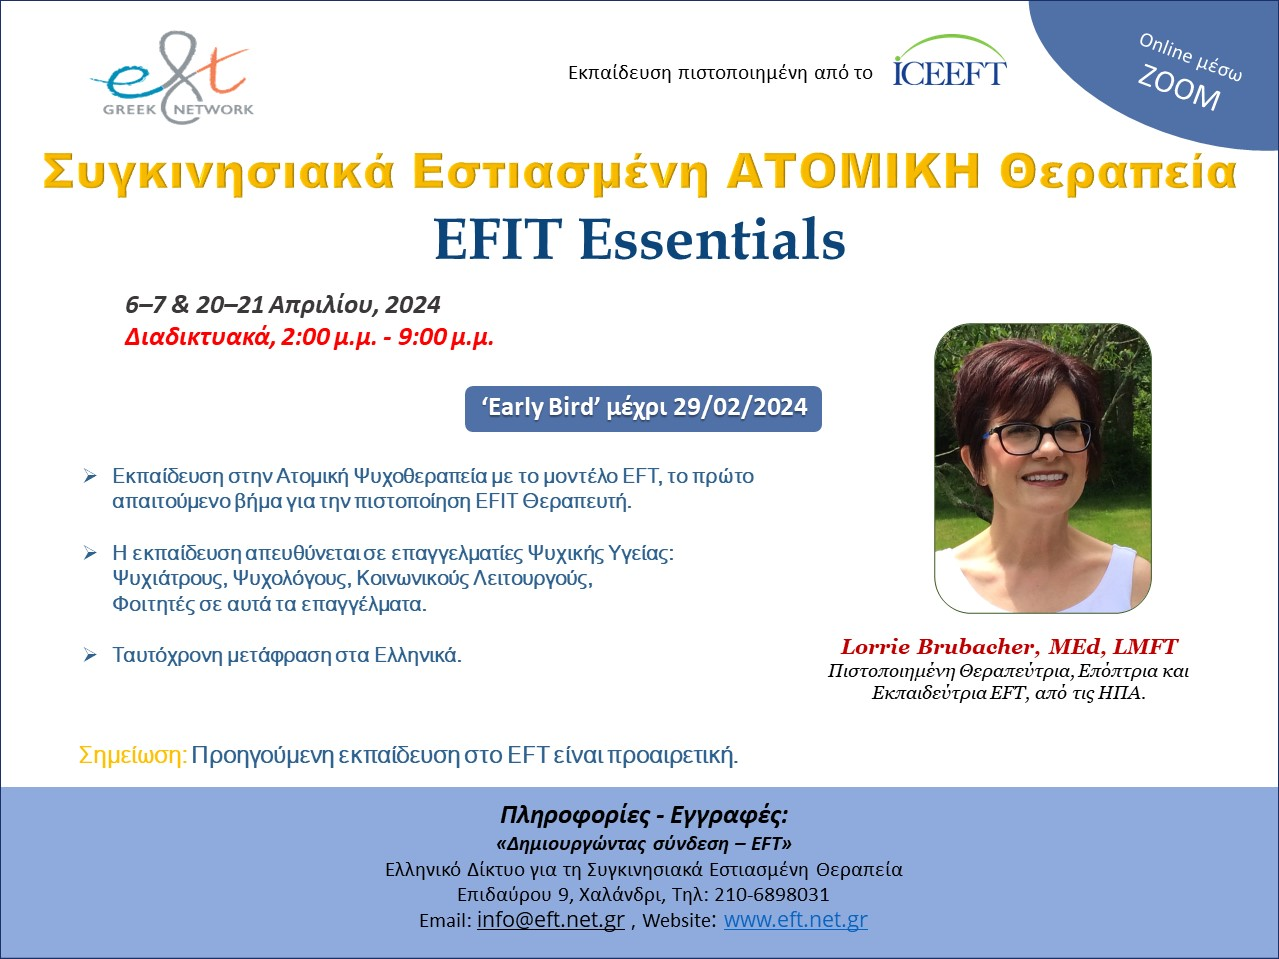 EFIT Essentials, Emotionally Focused INDIVIDUAL Therapy - Lorrie Brubacher